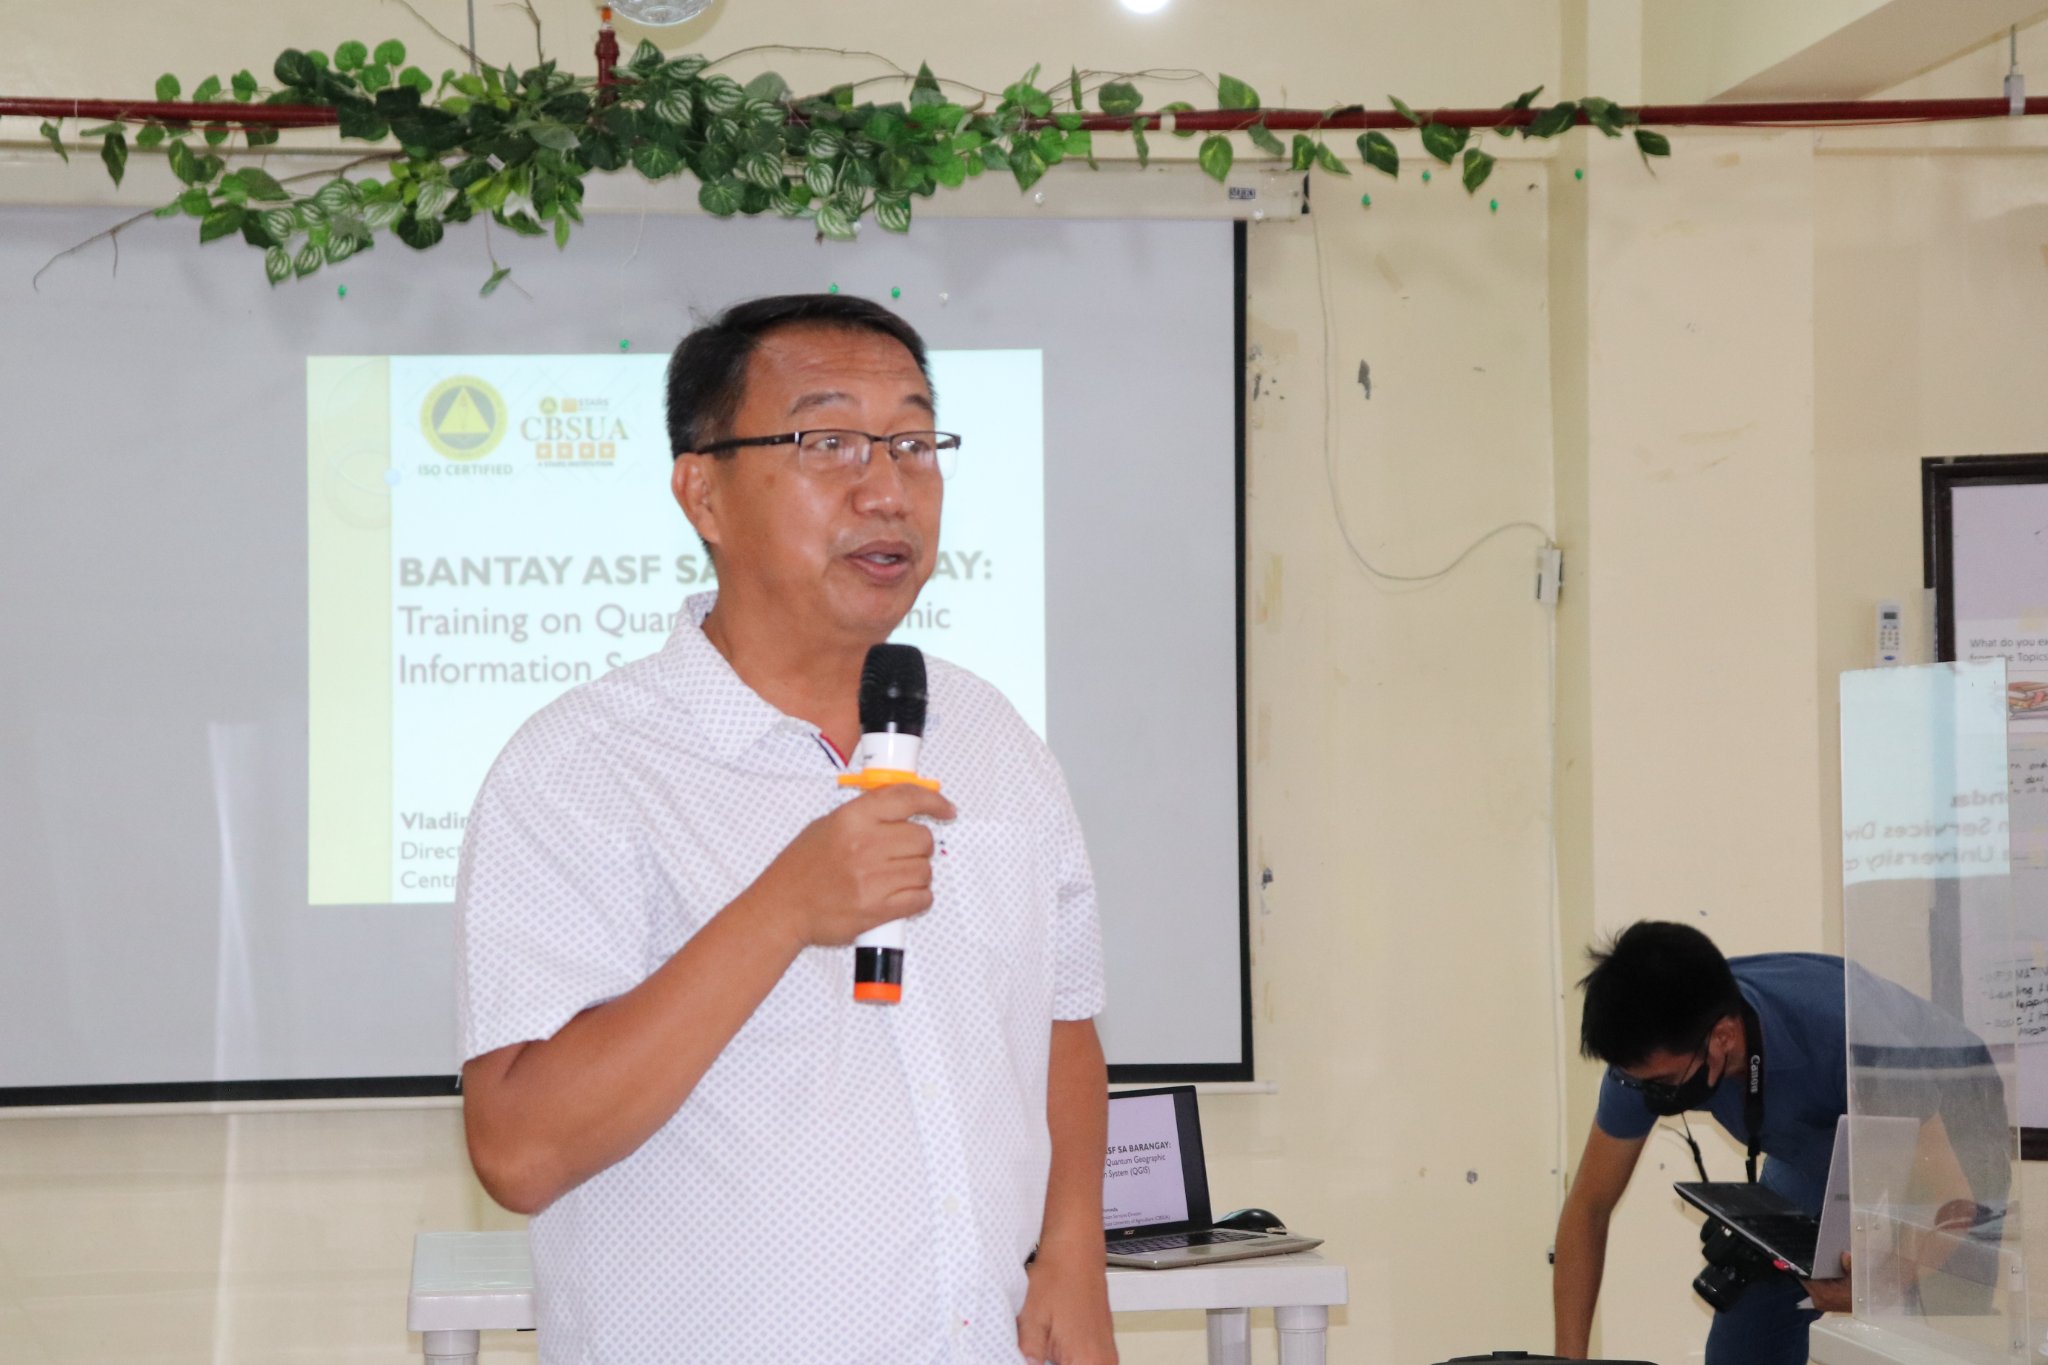 CBSUA-DAIC, ATI-R5 TO SUSTAIN CAPACITY-BUILDING ON GIS FOR LGU-AGRICULTURAL EXTENSION WORKERS